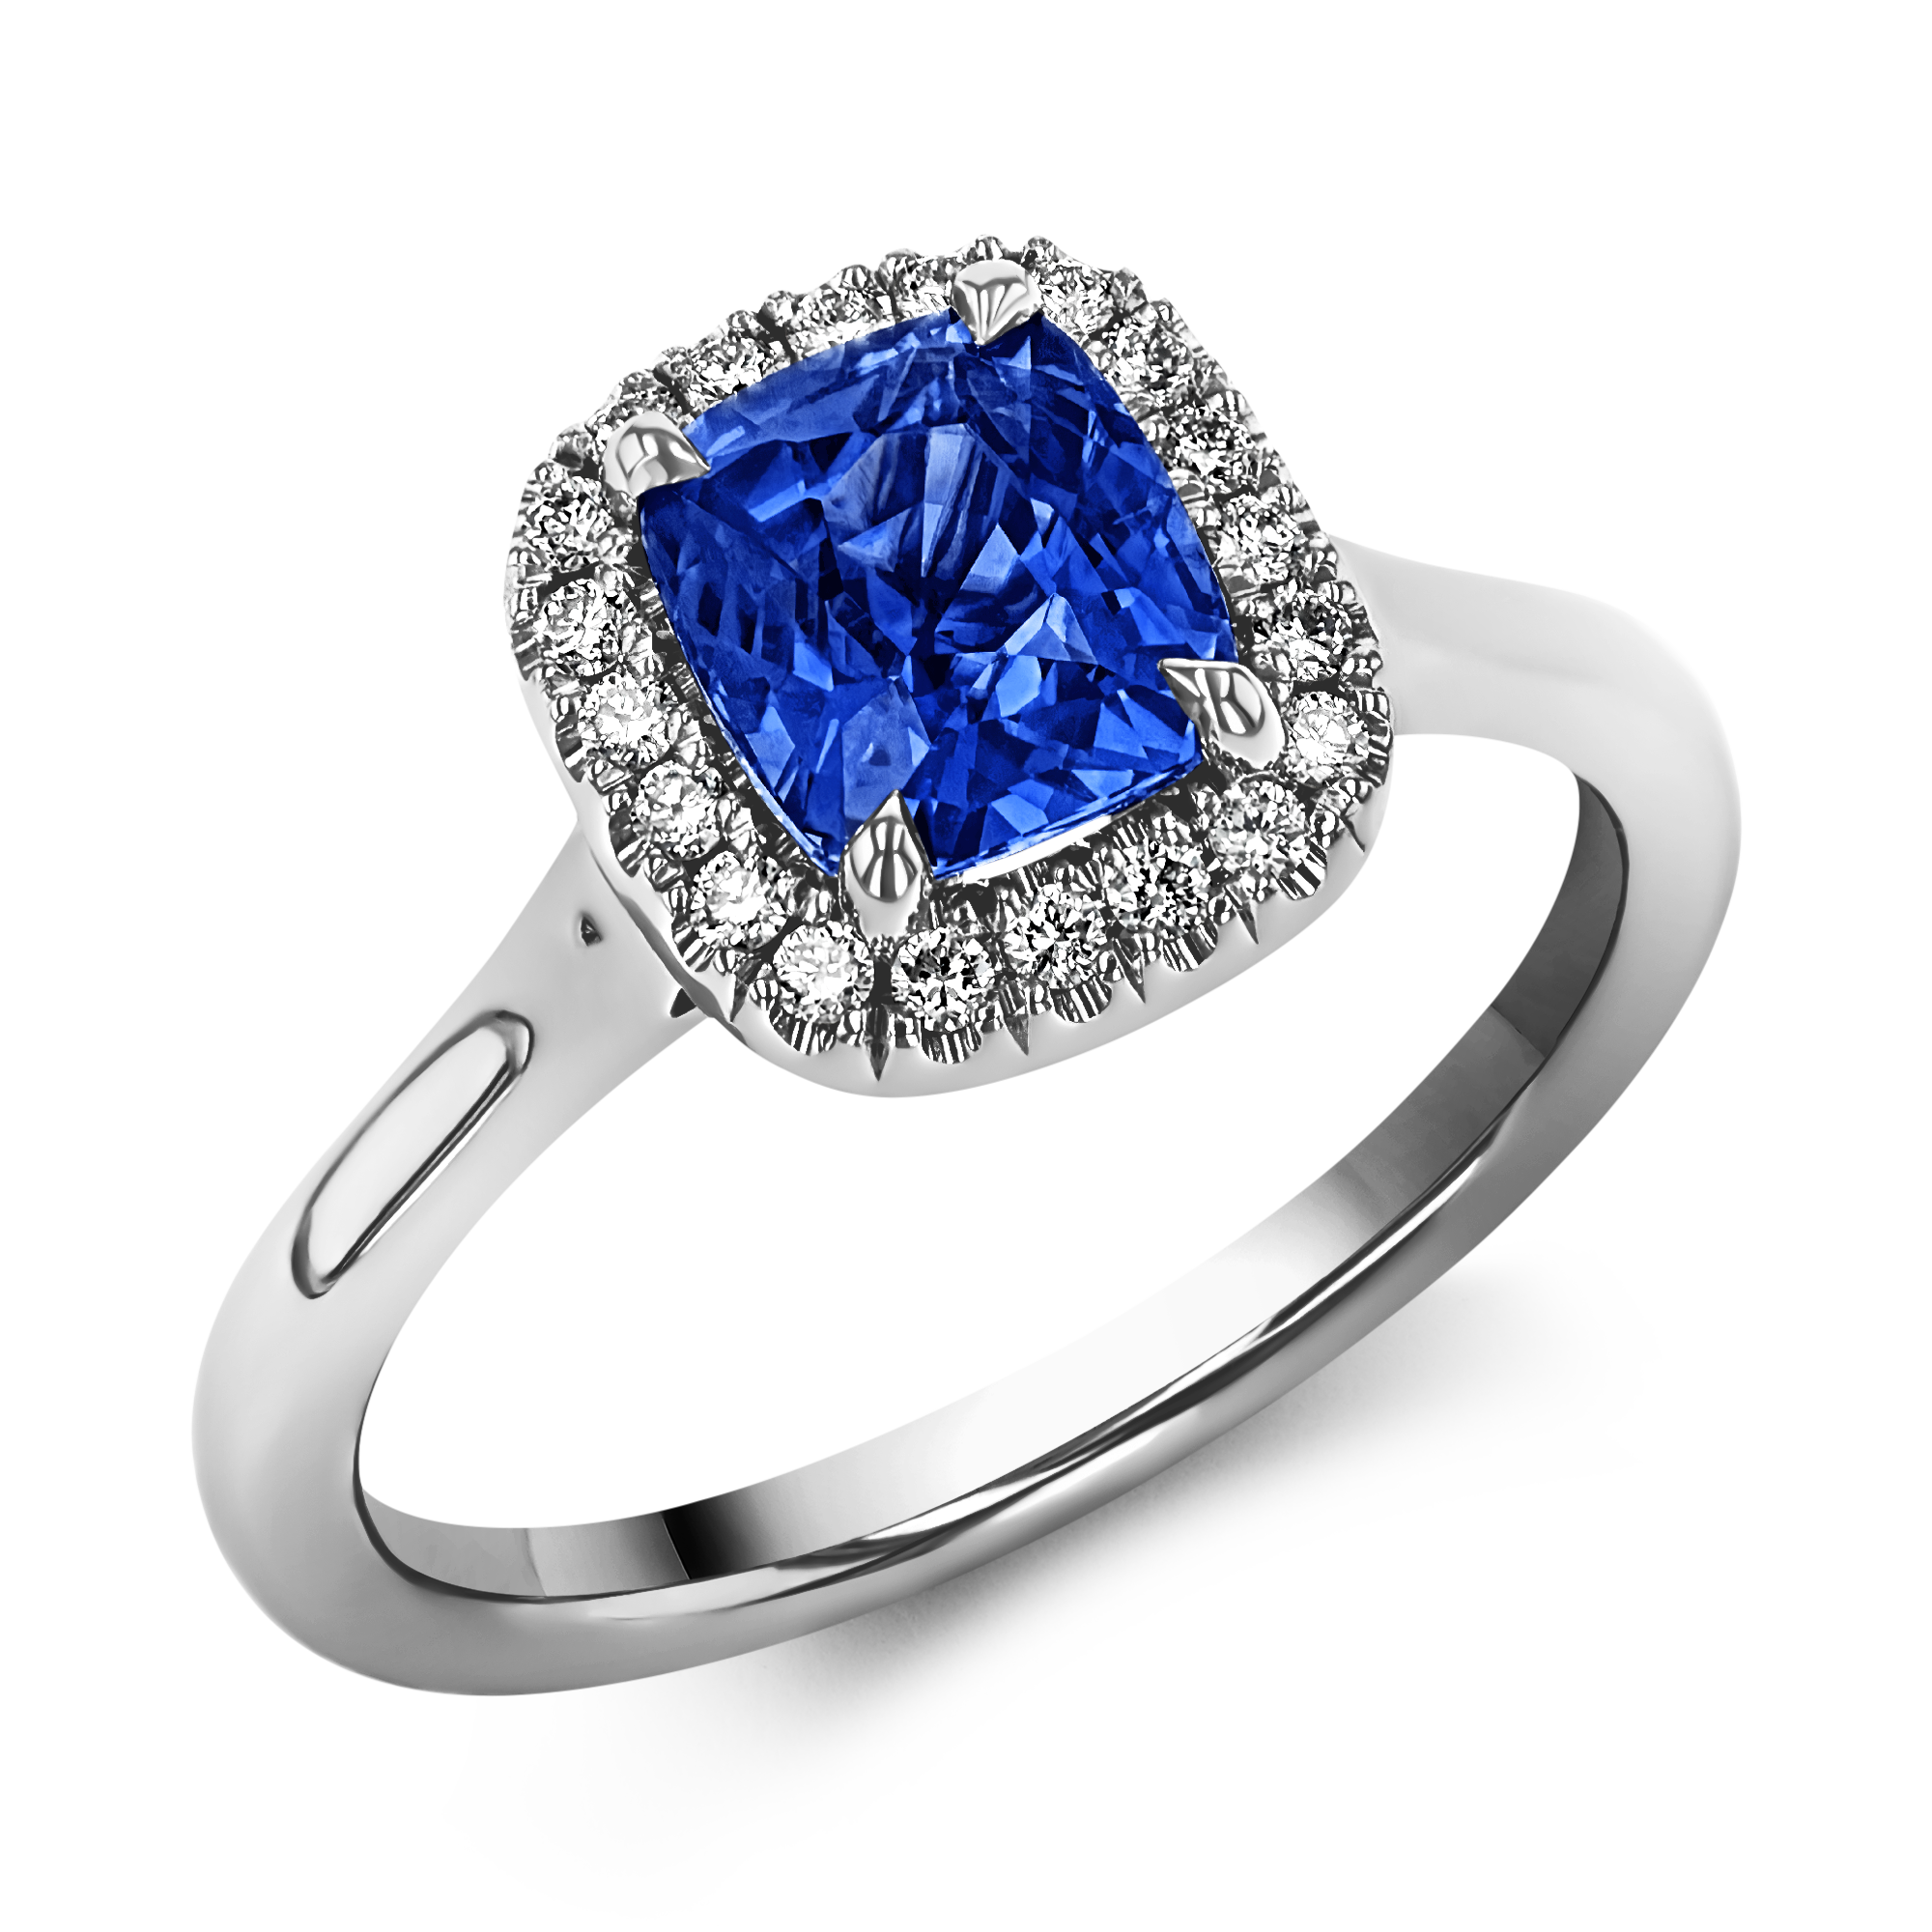 Celestial 1.61ct Sapphire and Diamond Cluster Ring Cushion Cut, Claw Set_1